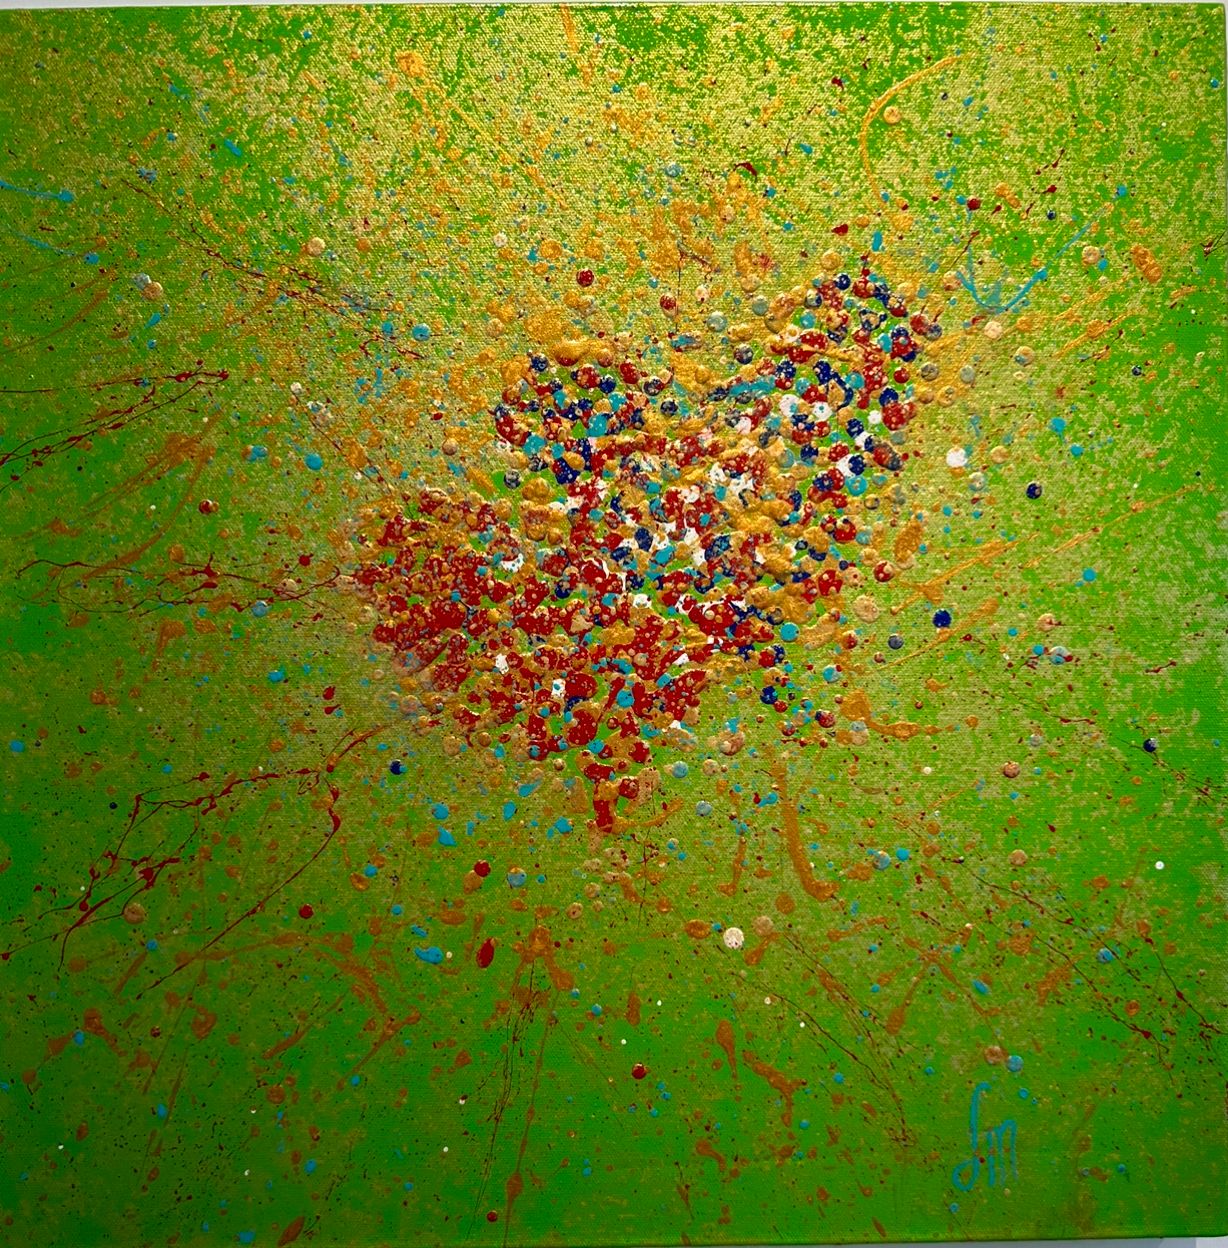 "Love 2" is an abstract mixed media artwork that evokes love with vibrant colors and a sparkling vitality, set against a green background that provides balance. It sounds captivating!